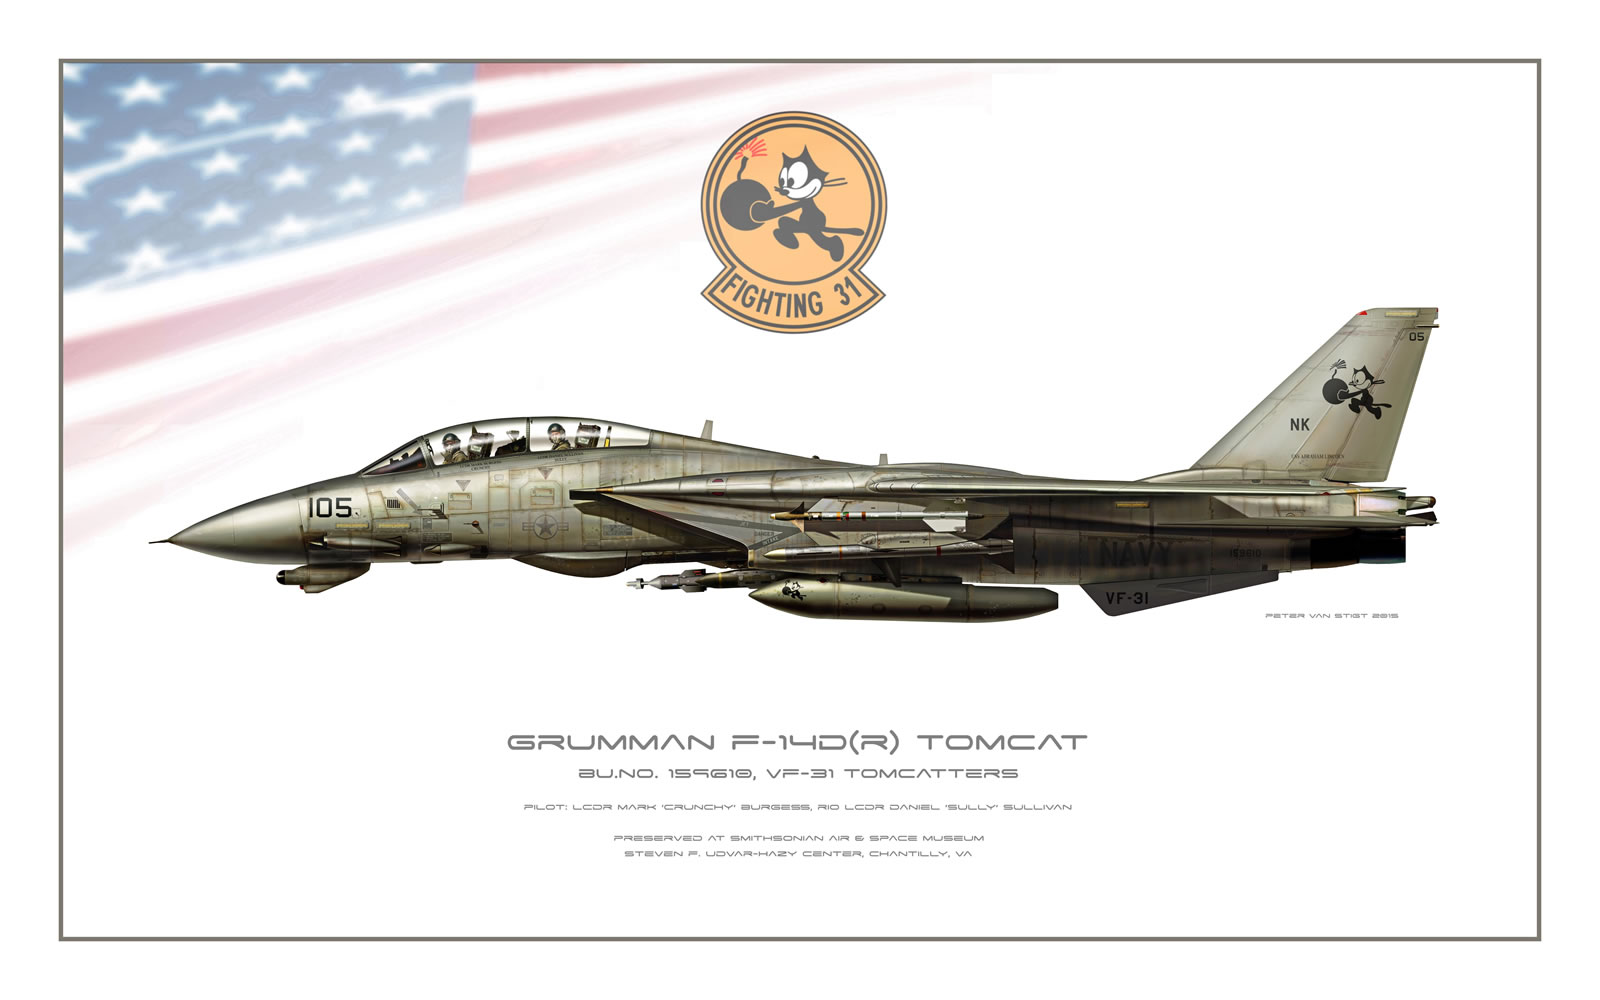 VF-31 Tomcatters at Smithsonian F-14D Tomcat Profile